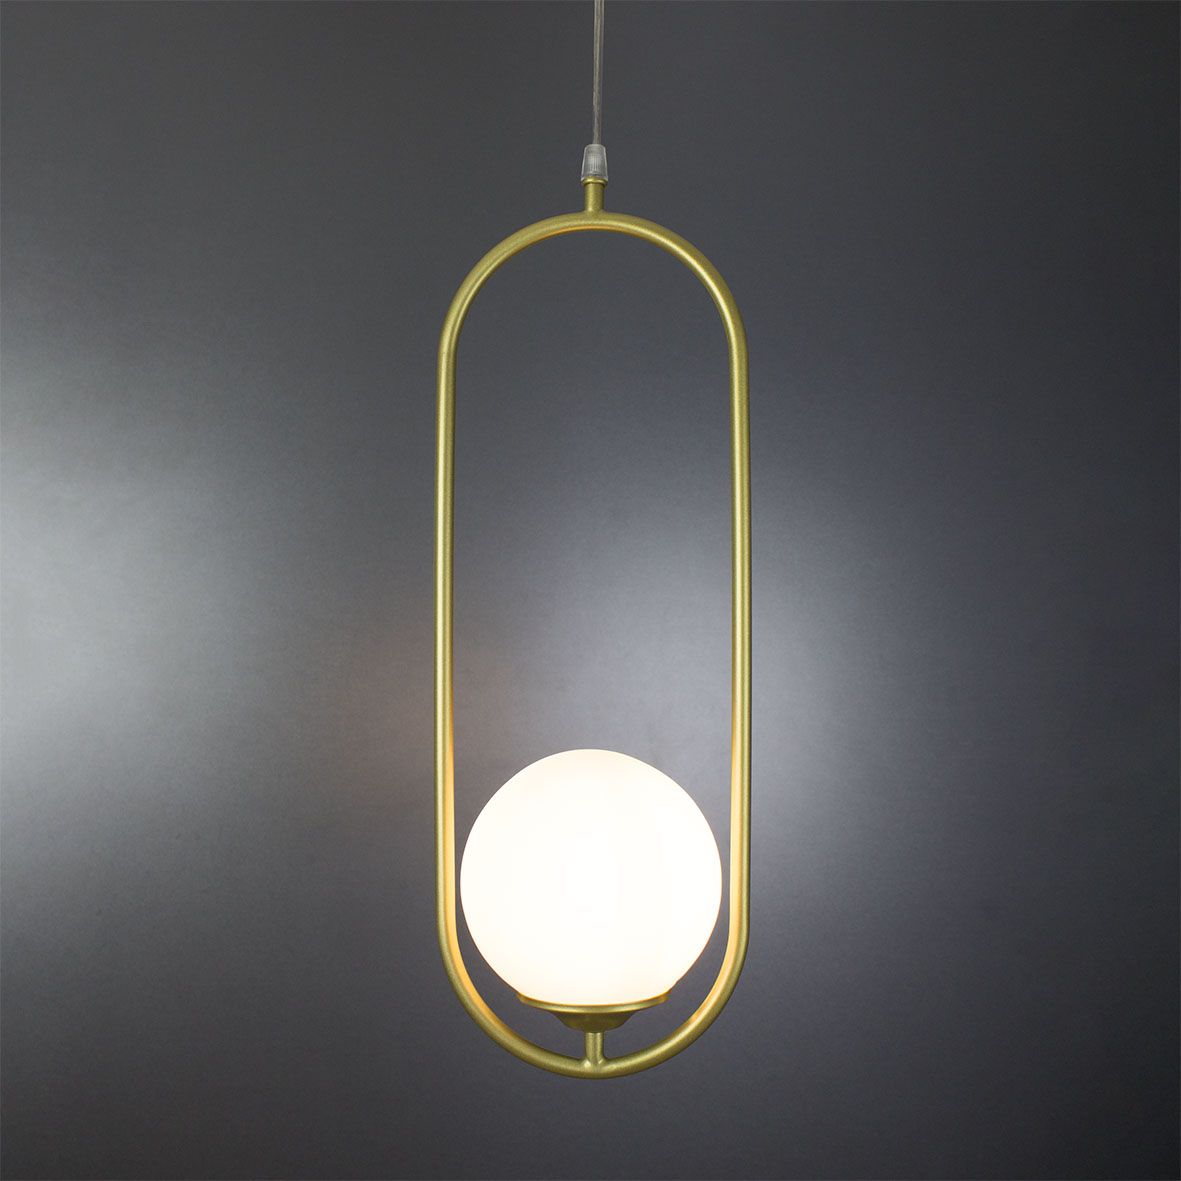 Suspension lamp Twins gold / white